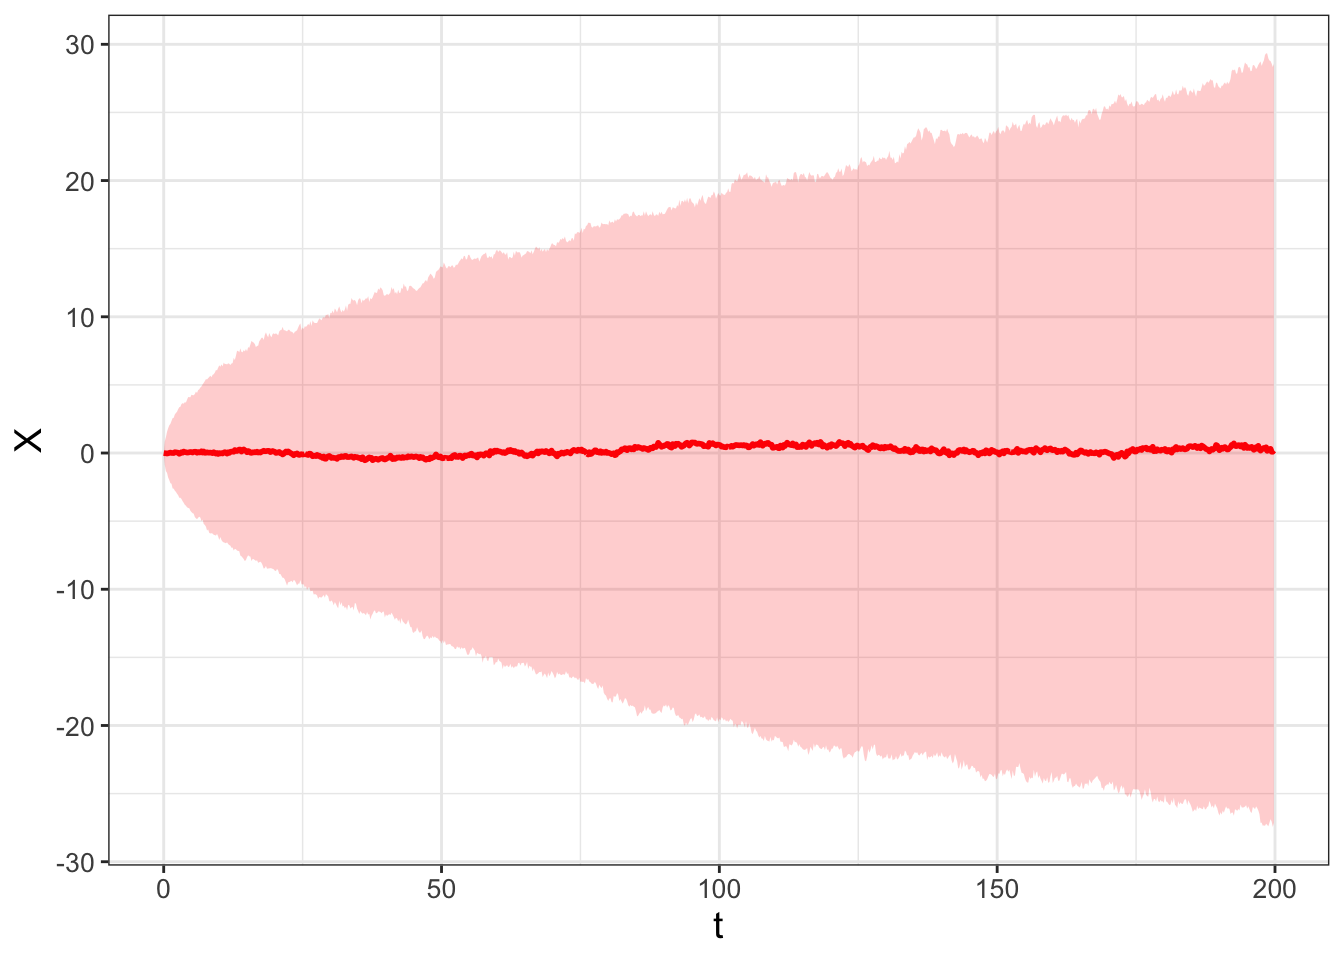 Ensemble average of 1000 realizations of the stochastic differential equation $dX = dW(t)$.